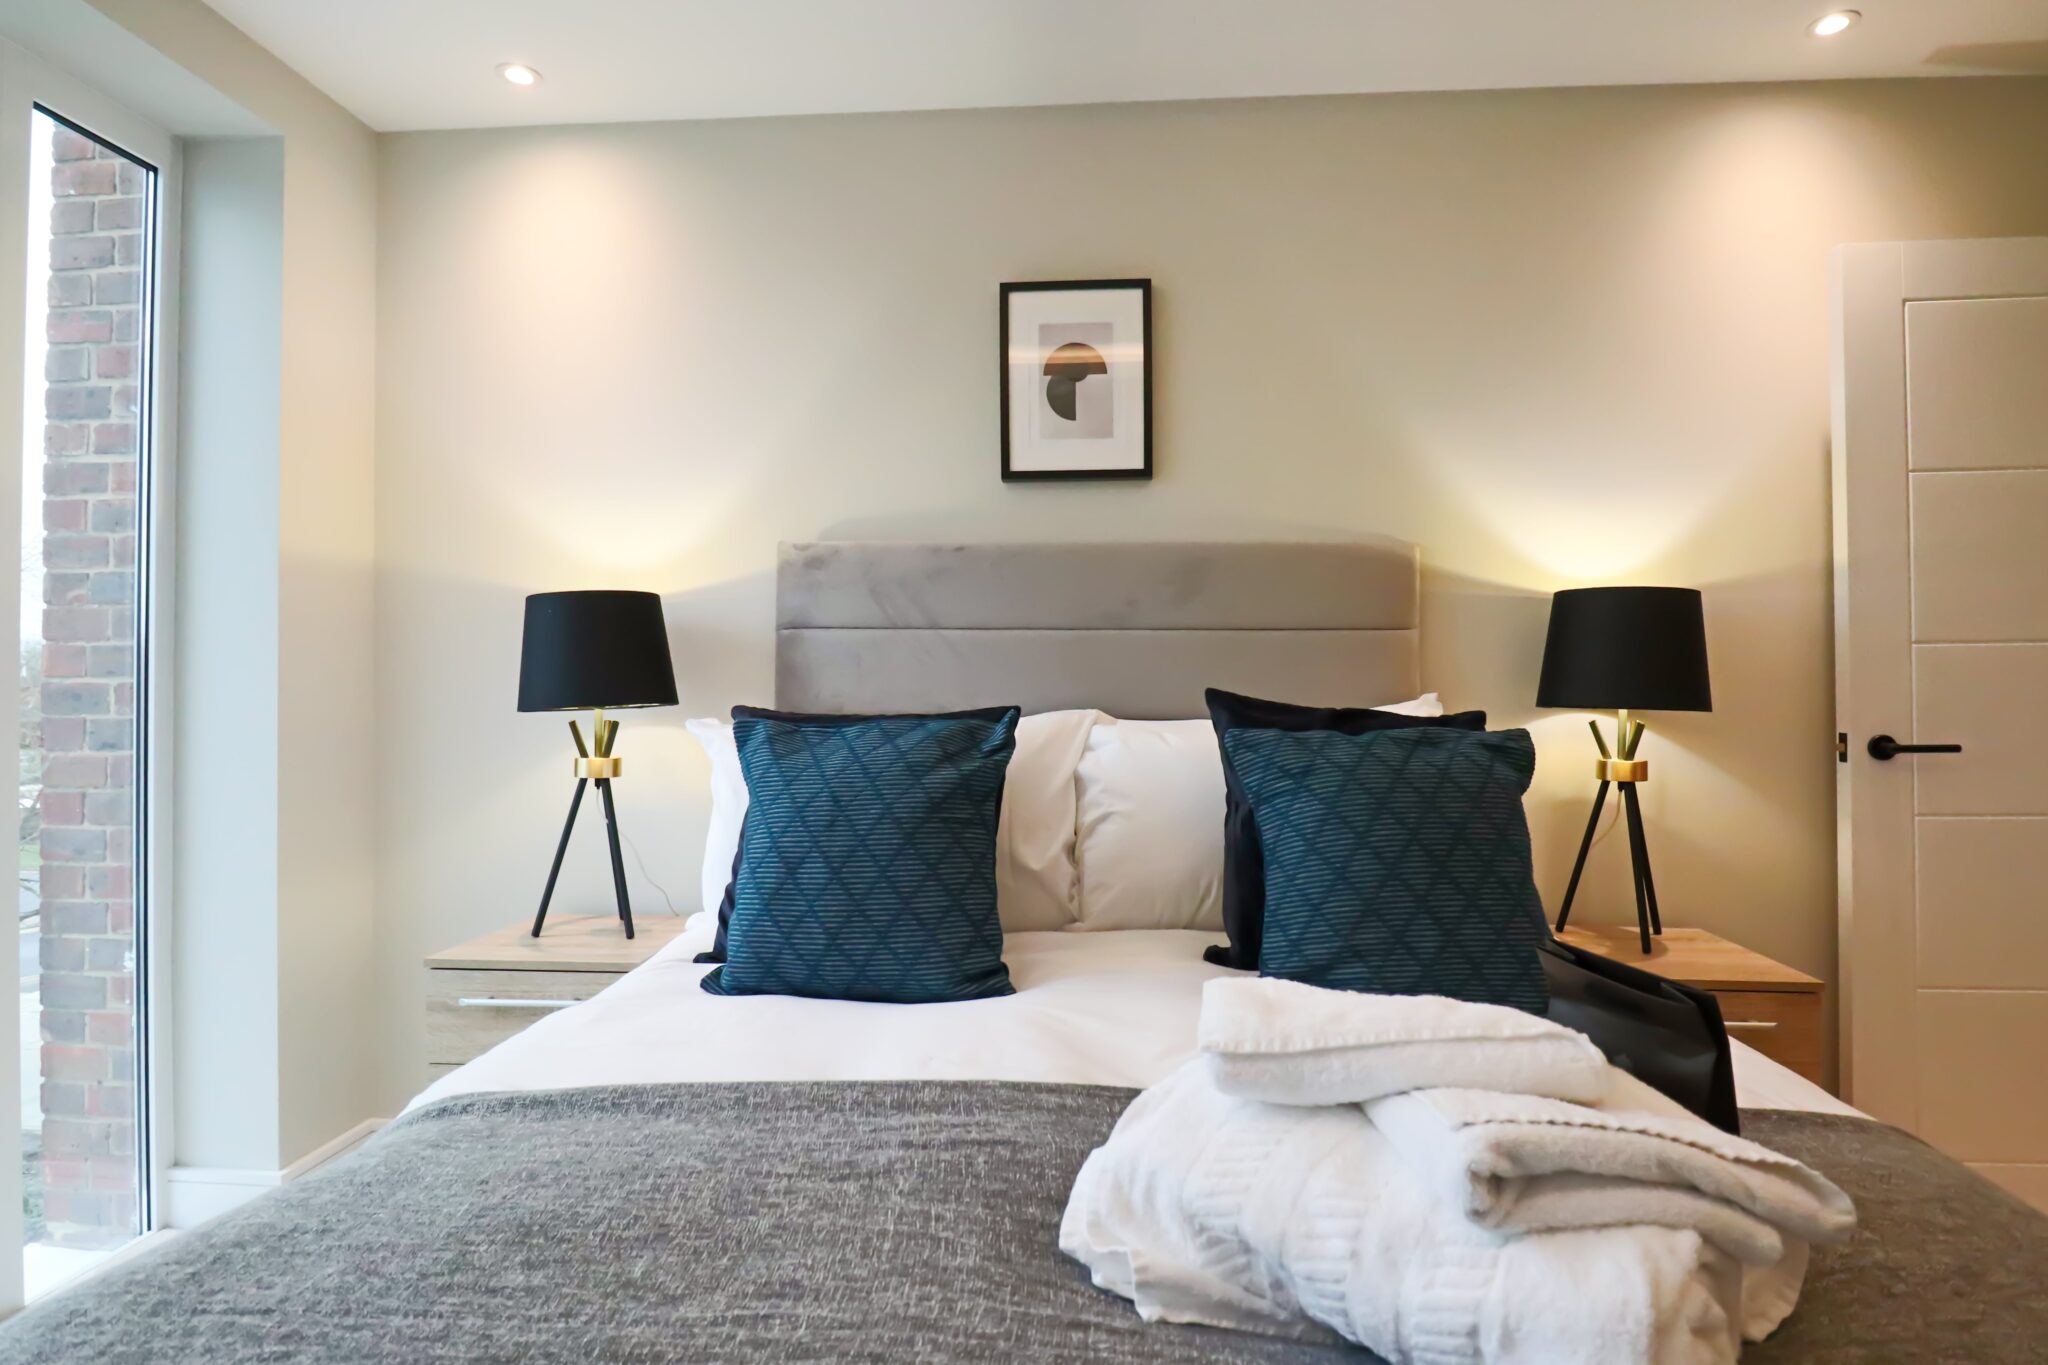 Welwyn-Garden-City-Apartments-offer-the-ideal-short-let-serviced-accommodation-in-Hertfordshire.-Book-modern-self-catering-accommodation-in-Welwyn-Garden-City-Centre-now-with-urban-Stay!-we-offer-free-wifi,-weekly-cleaning-and-parking